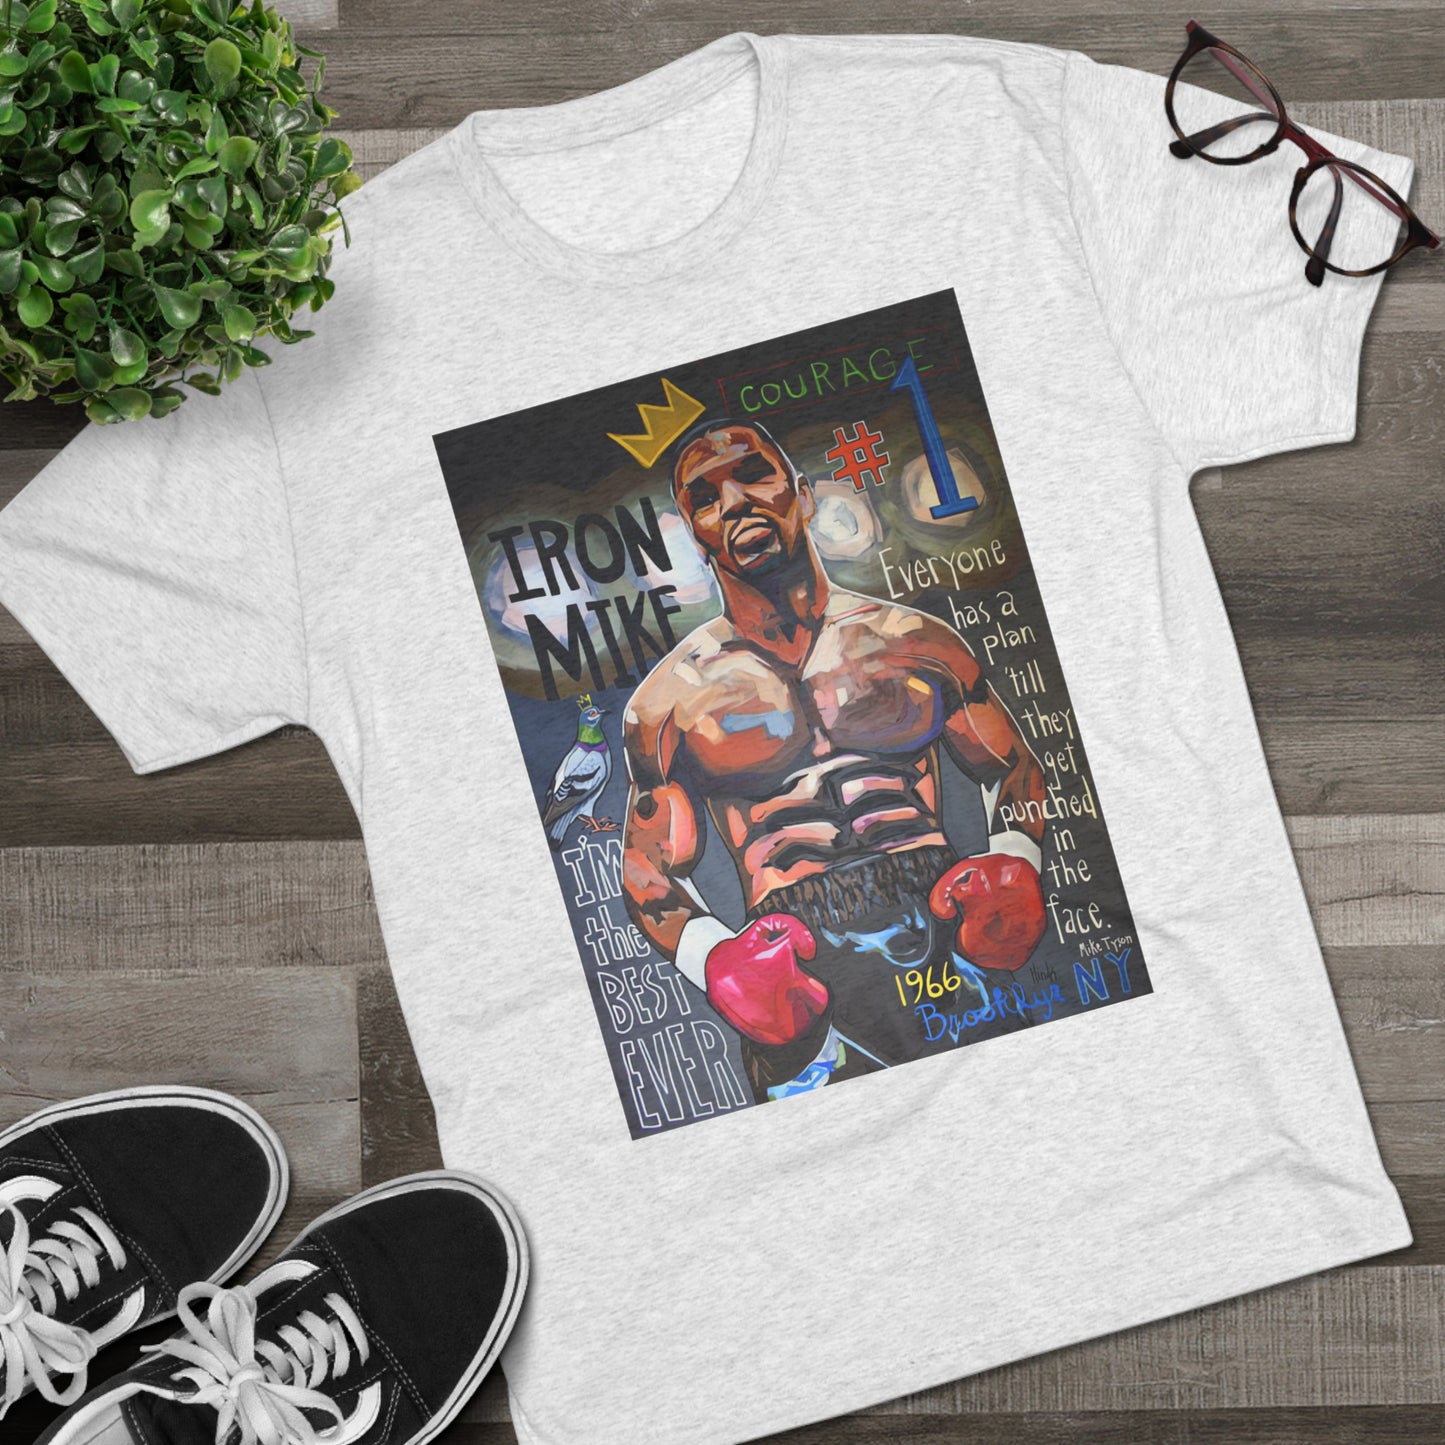 Iron Mike - Legendary Boxer Tribute Tri-Blend T-Shirt - Ultra-Soft, Iconic Fighter Inspired Design